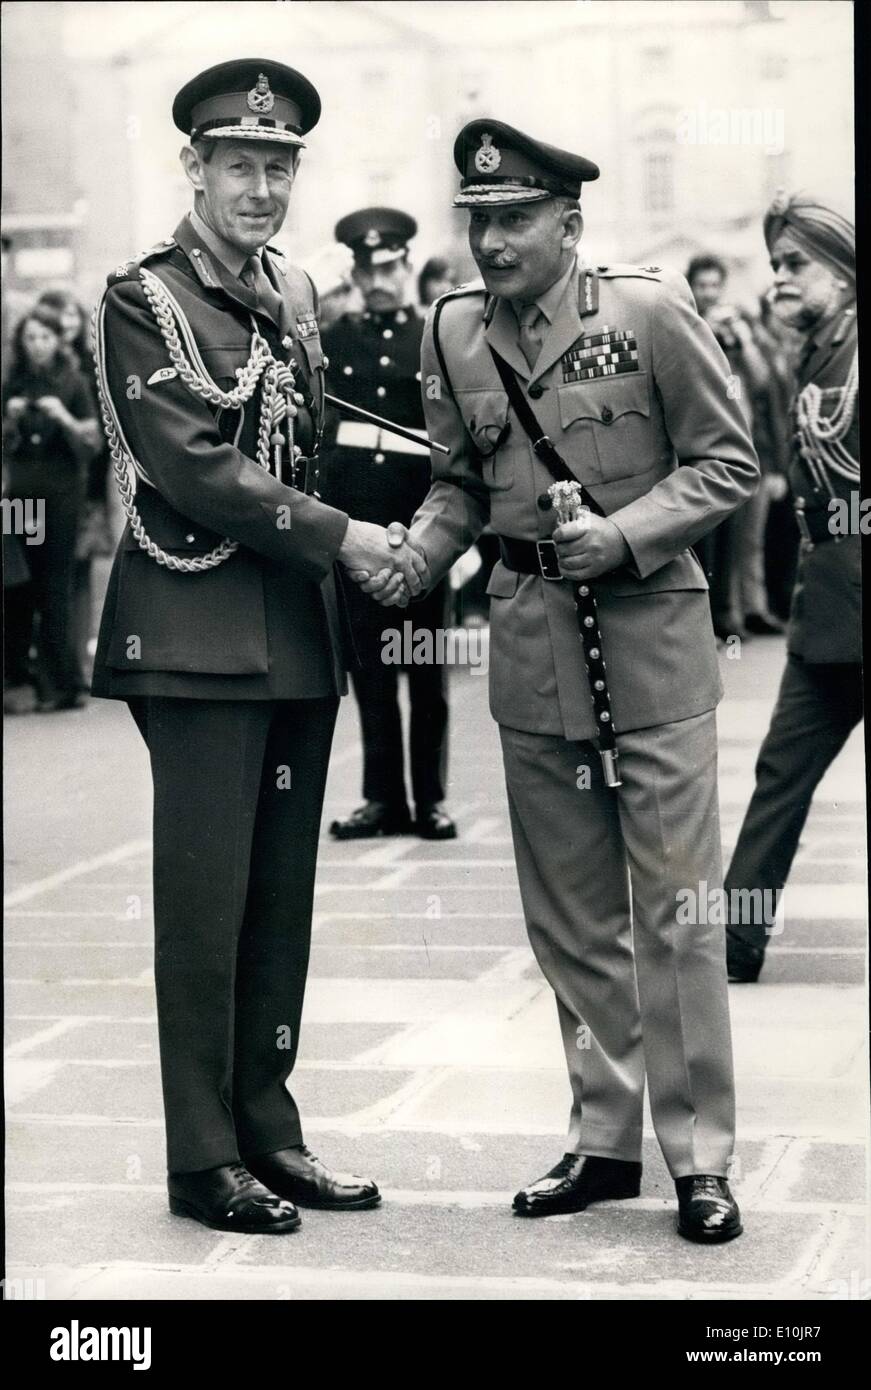 Apr. 16, 1973 - April 16th 1973 Field Marshal Manekshaw, Indian Army. Field Marshal S.H.F.J. Manekshaw, MC., Indian Army, who is on a visit ot the United Kingdom, this morning went to the Ministry of Defence, London where he was greeted by Chief of General Staff, General Sir Michael Carver, and a Guard of Honour found by 1st Battalion The Irish Guards, with the Band of Coldstream Guards in attendance. Field Marshal Manekshaw held the appointment of Chief of the Army staff India from June 8, 1969 to Jan 15, 1973. He is the first Indian officer to hold the rank of Field Marshal Stock Photo